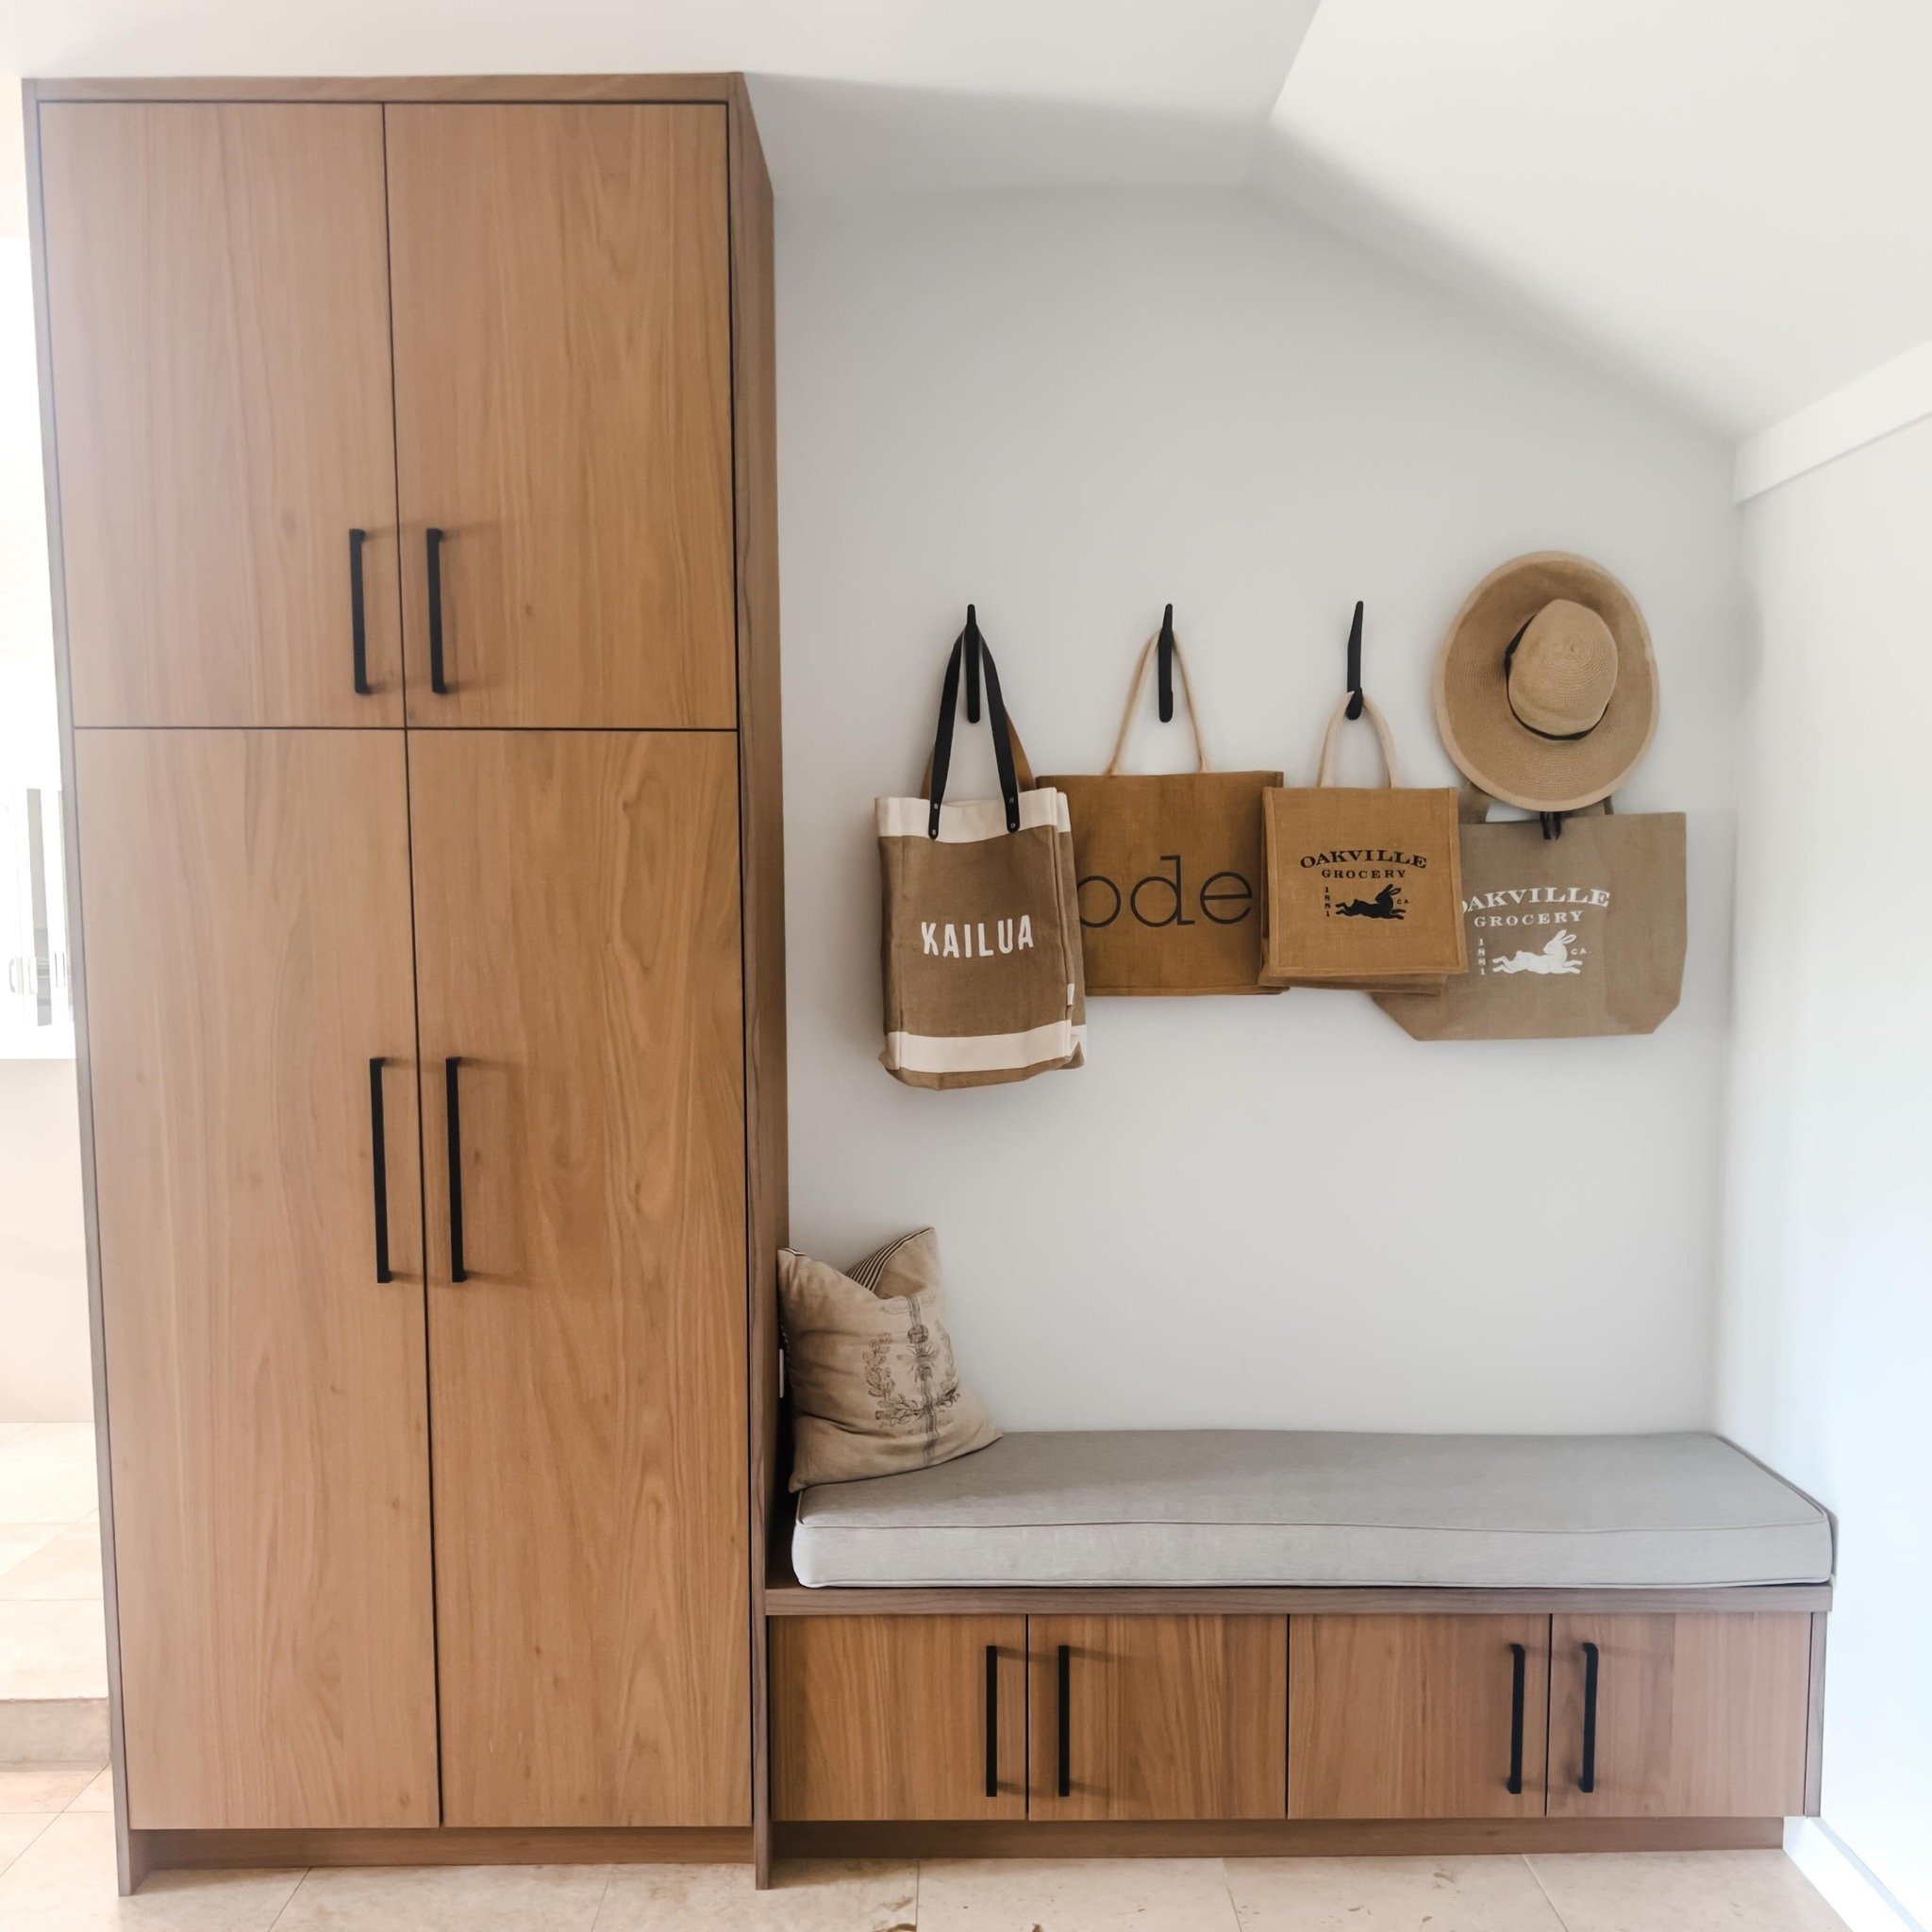 A beautiful multi-purpose spot, off the garage.  The tall Walnut cabinet doubles as an over-flow pantry and storage for miscellaneous items.  The bench cabinet keeps the family&rsquo;s footwear out of site while providing a comfortable seat for the k